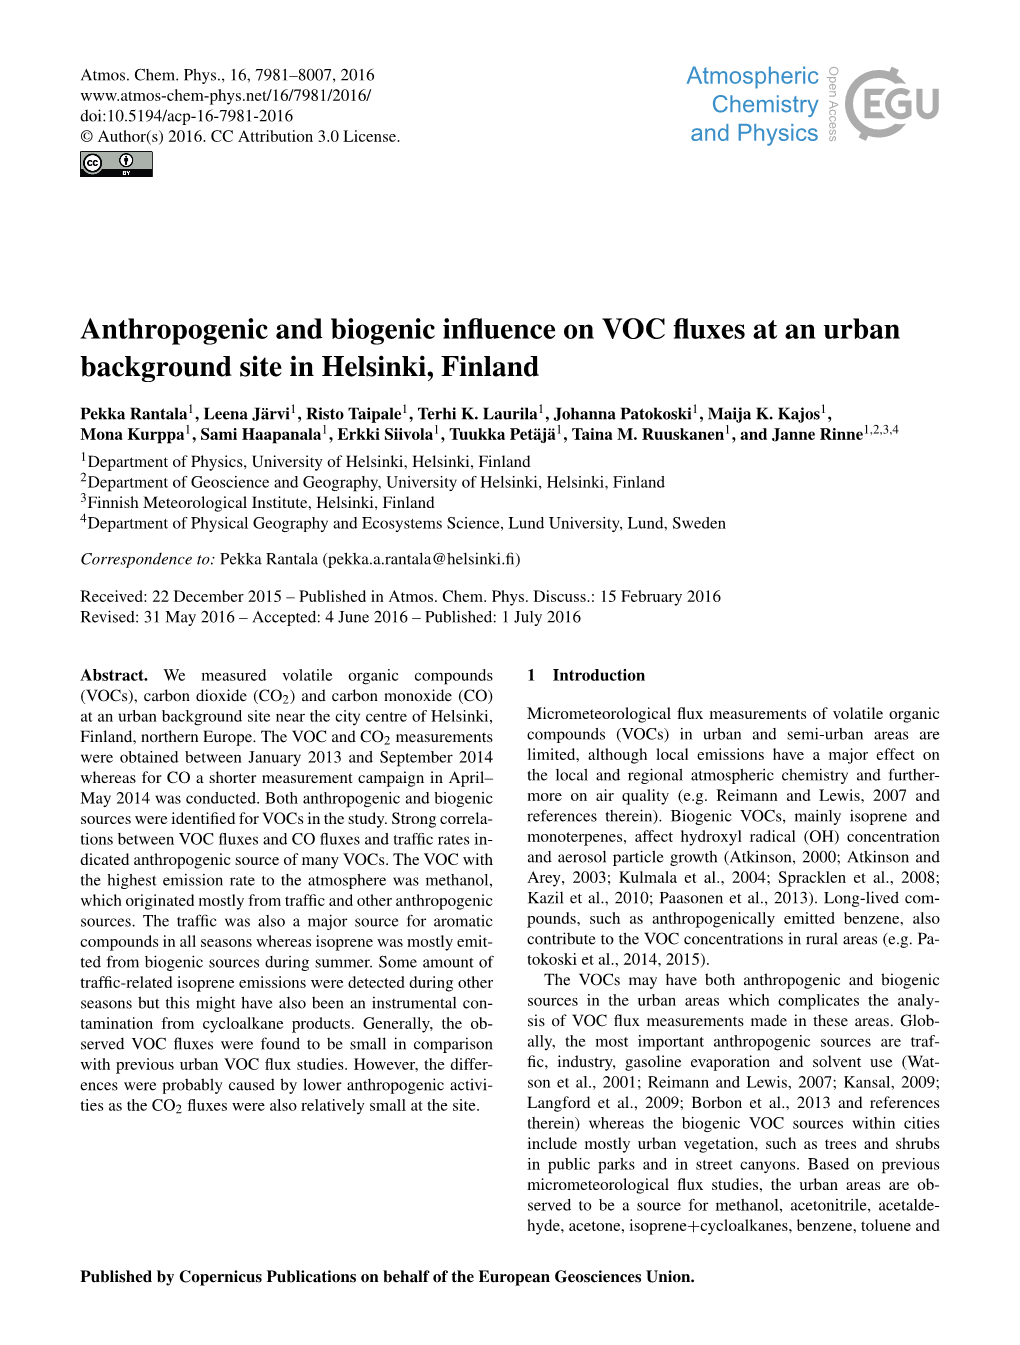 Anthropogenic and Biogenic Influence on VOC Fluxes at an Urban